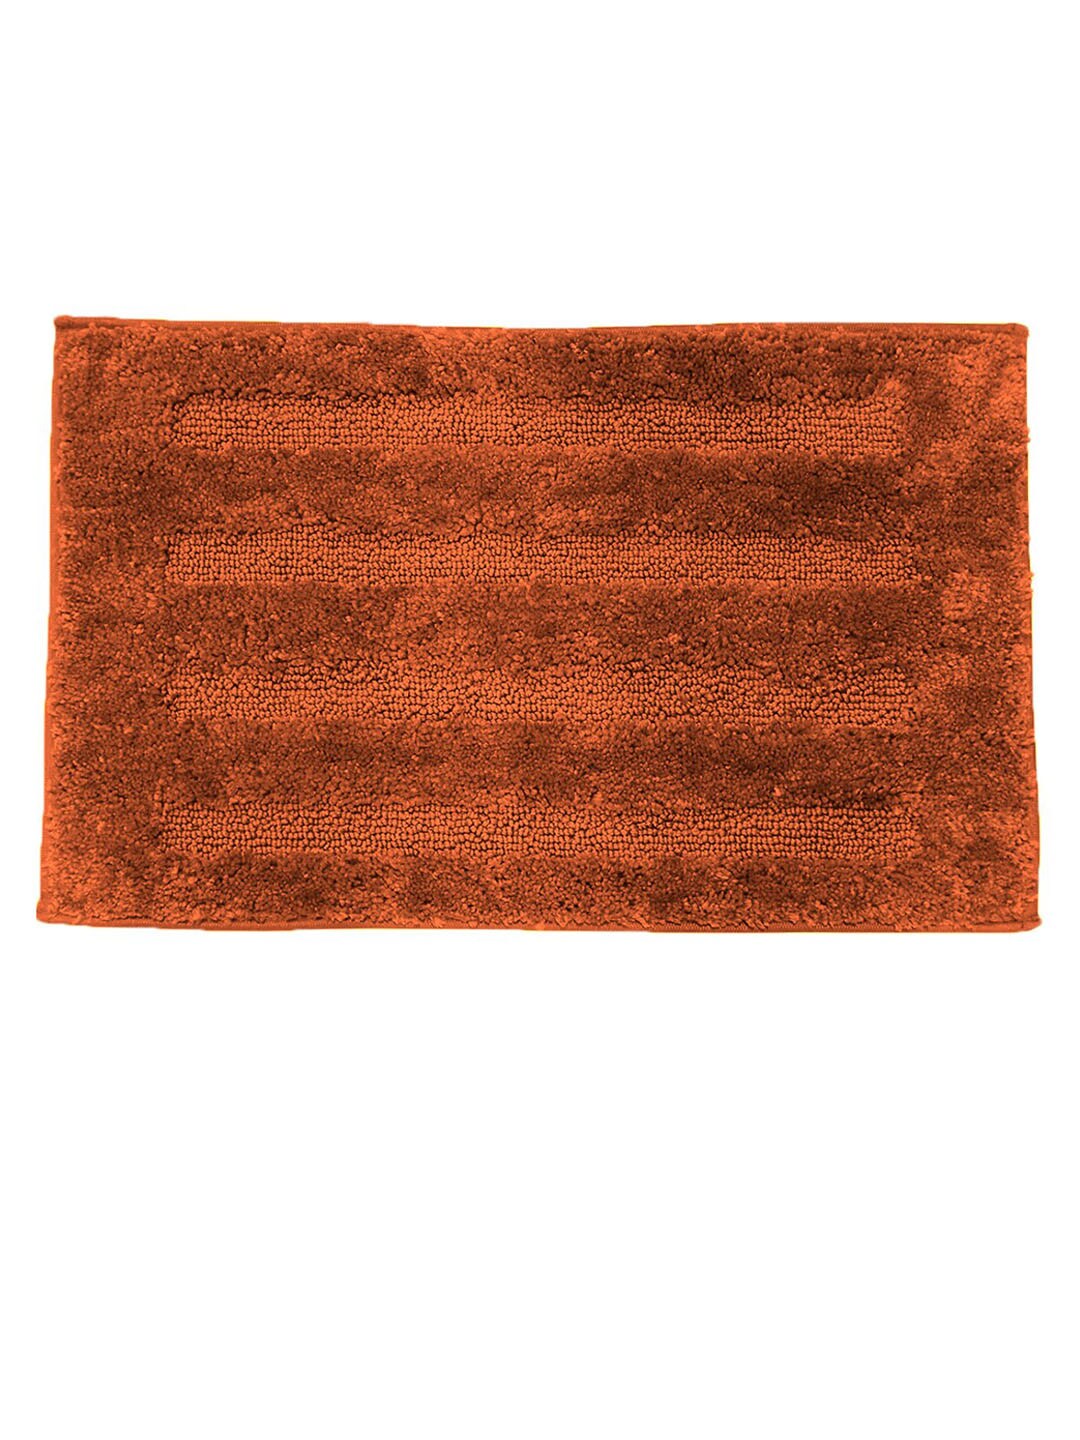 LUXEHOME INTERNATIONAL Rust 1780 GSM Bath Rug Price in India